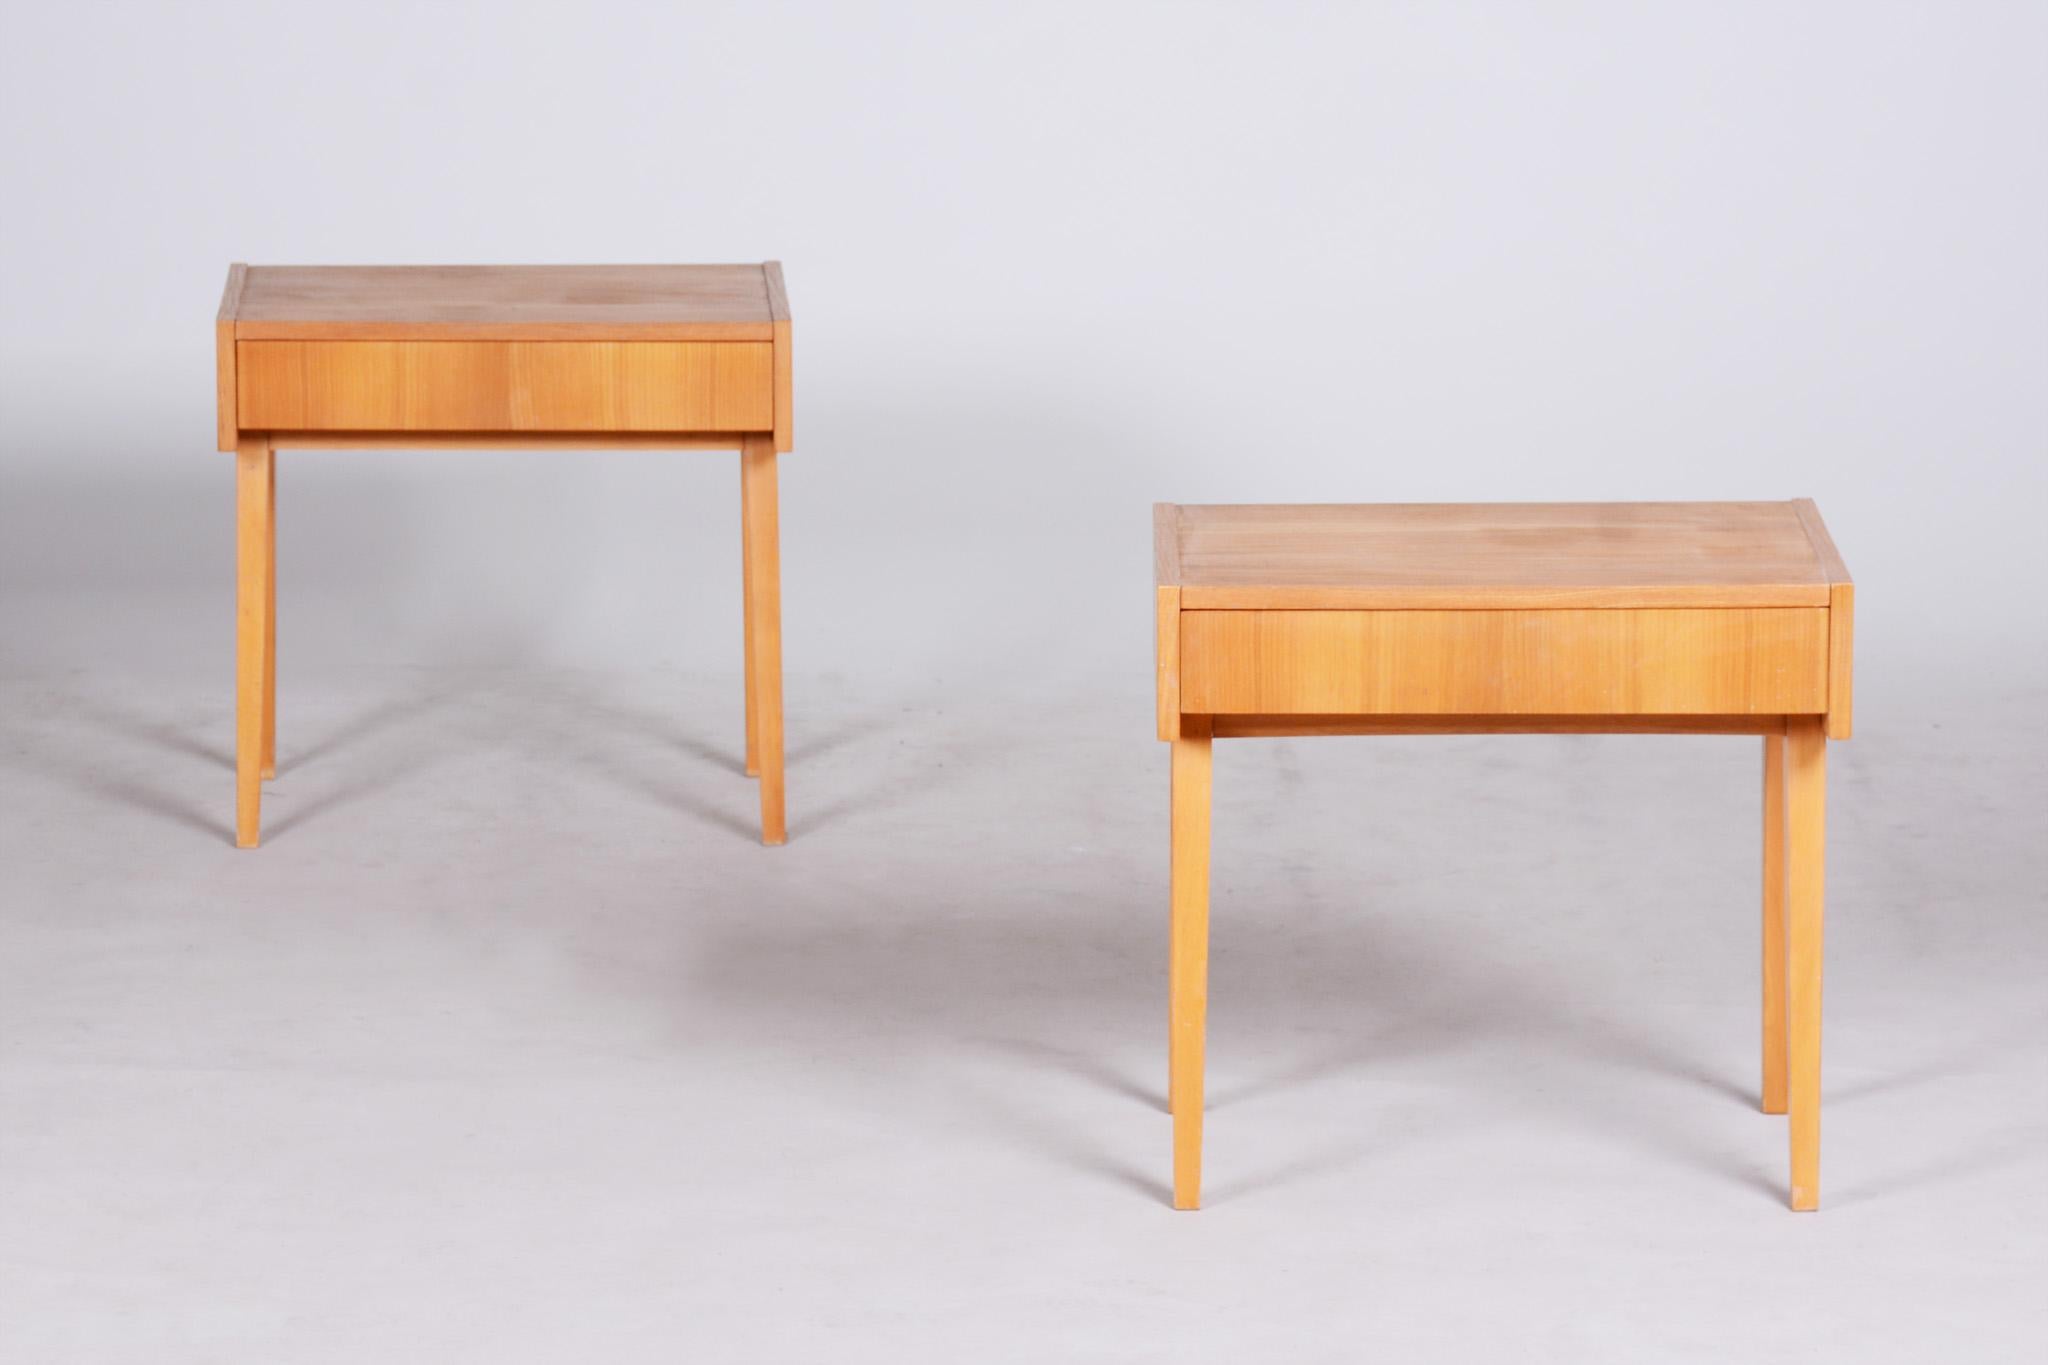 Pair of Ash Brown Midcentury Modeern Bedside Tables Made in Czechia, 1950s 5